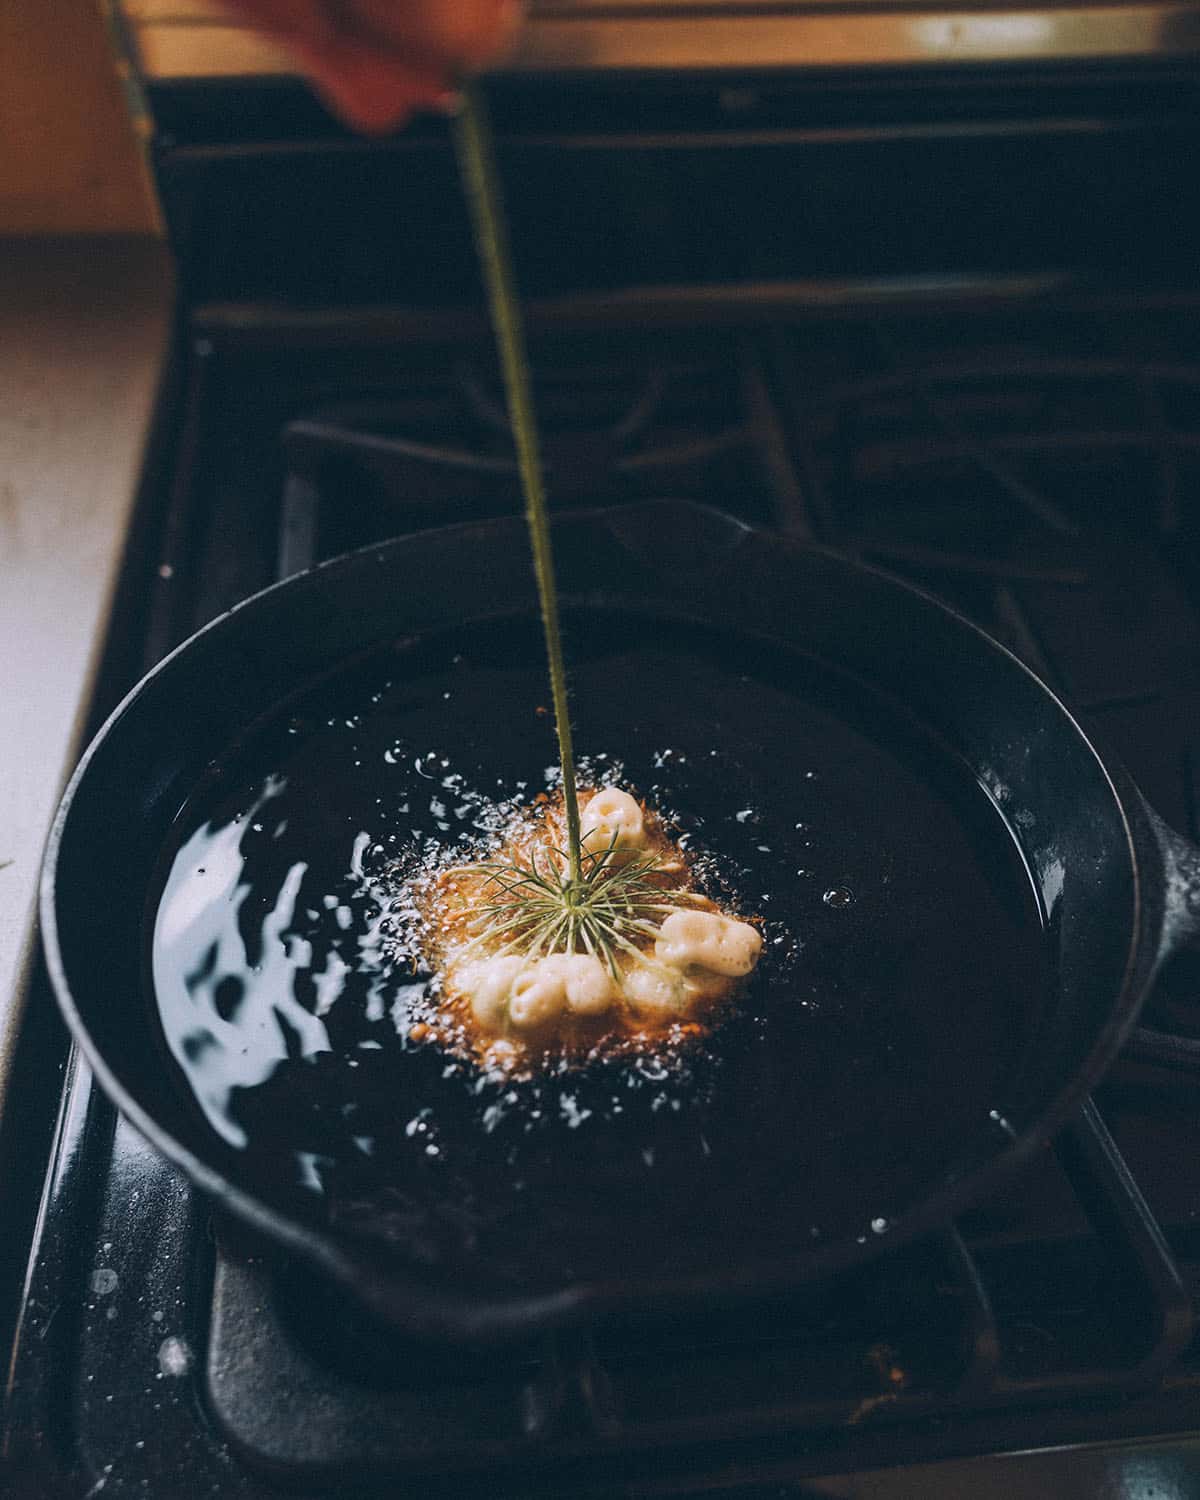 A Queen Anne's lace flower with batter, flower side down sizzling in hot oil in a black cast iron skillet. 